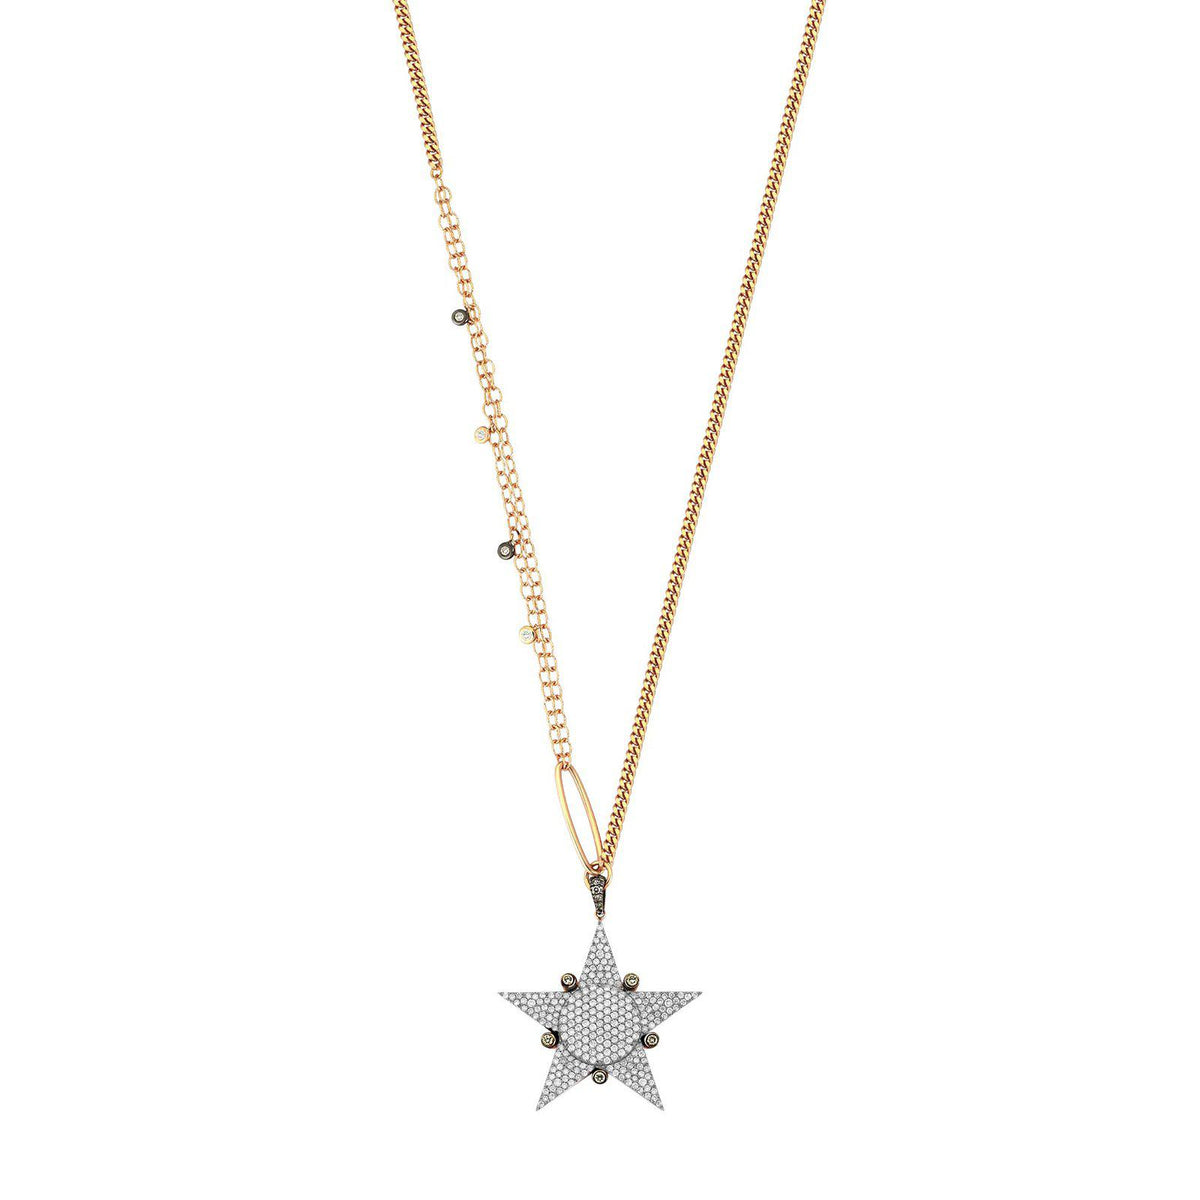 Maxi Eclectic Star Necklace